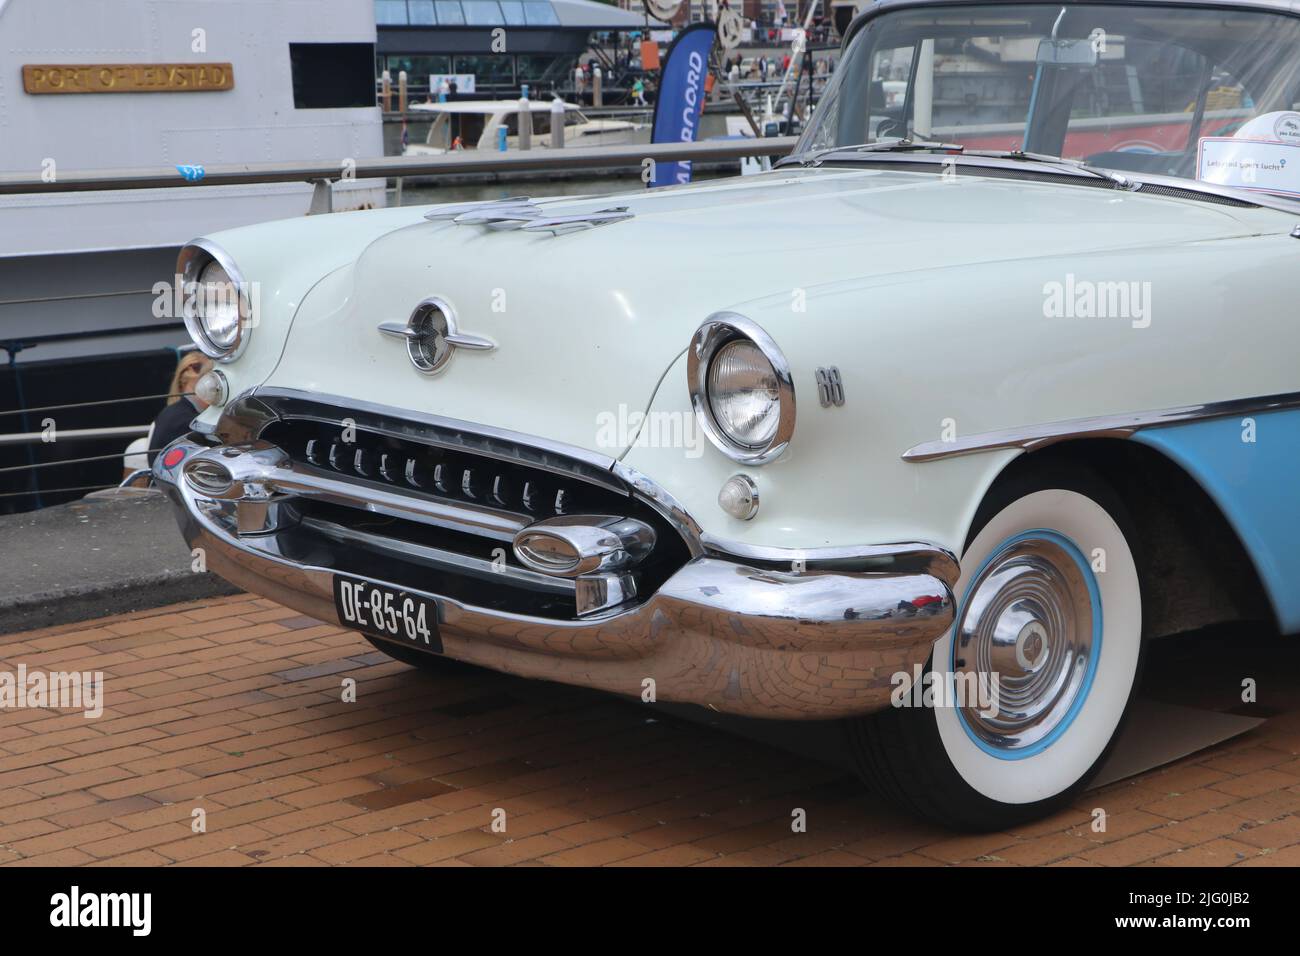 front of classic fifties american Oldsmobile car on old timer day in dutch city Lelystad, the Netherlands Stock Photo